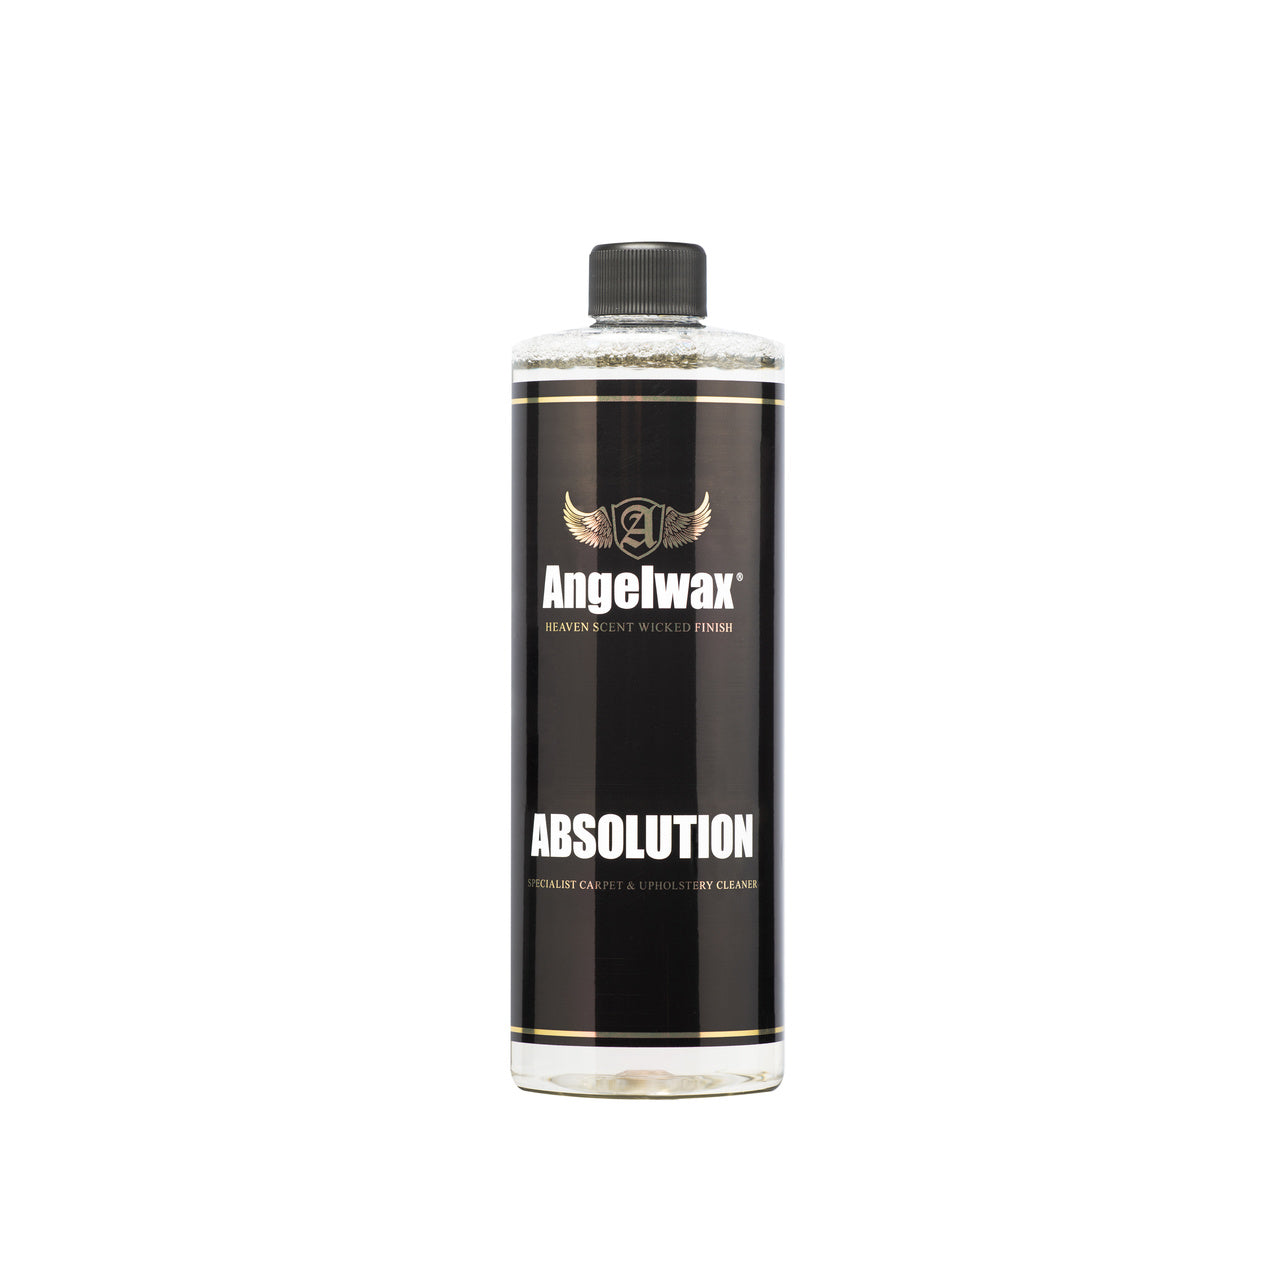 Angelwax Absolution Specialist Carpet & Upholstery Cleaner